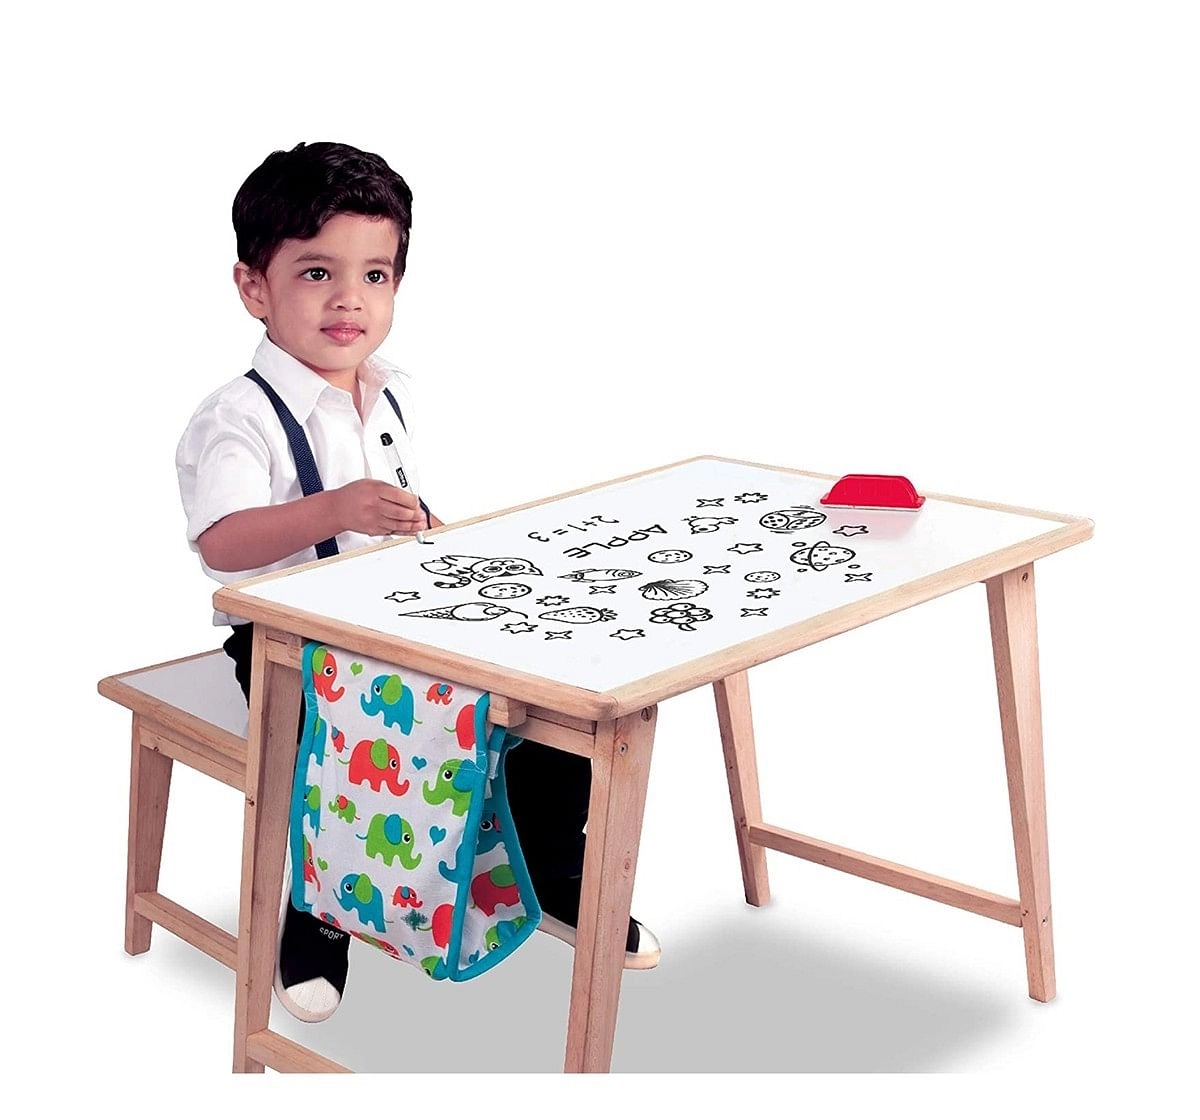 Giggles Activity Table and Stool for Kids 3Y+, Multicolour